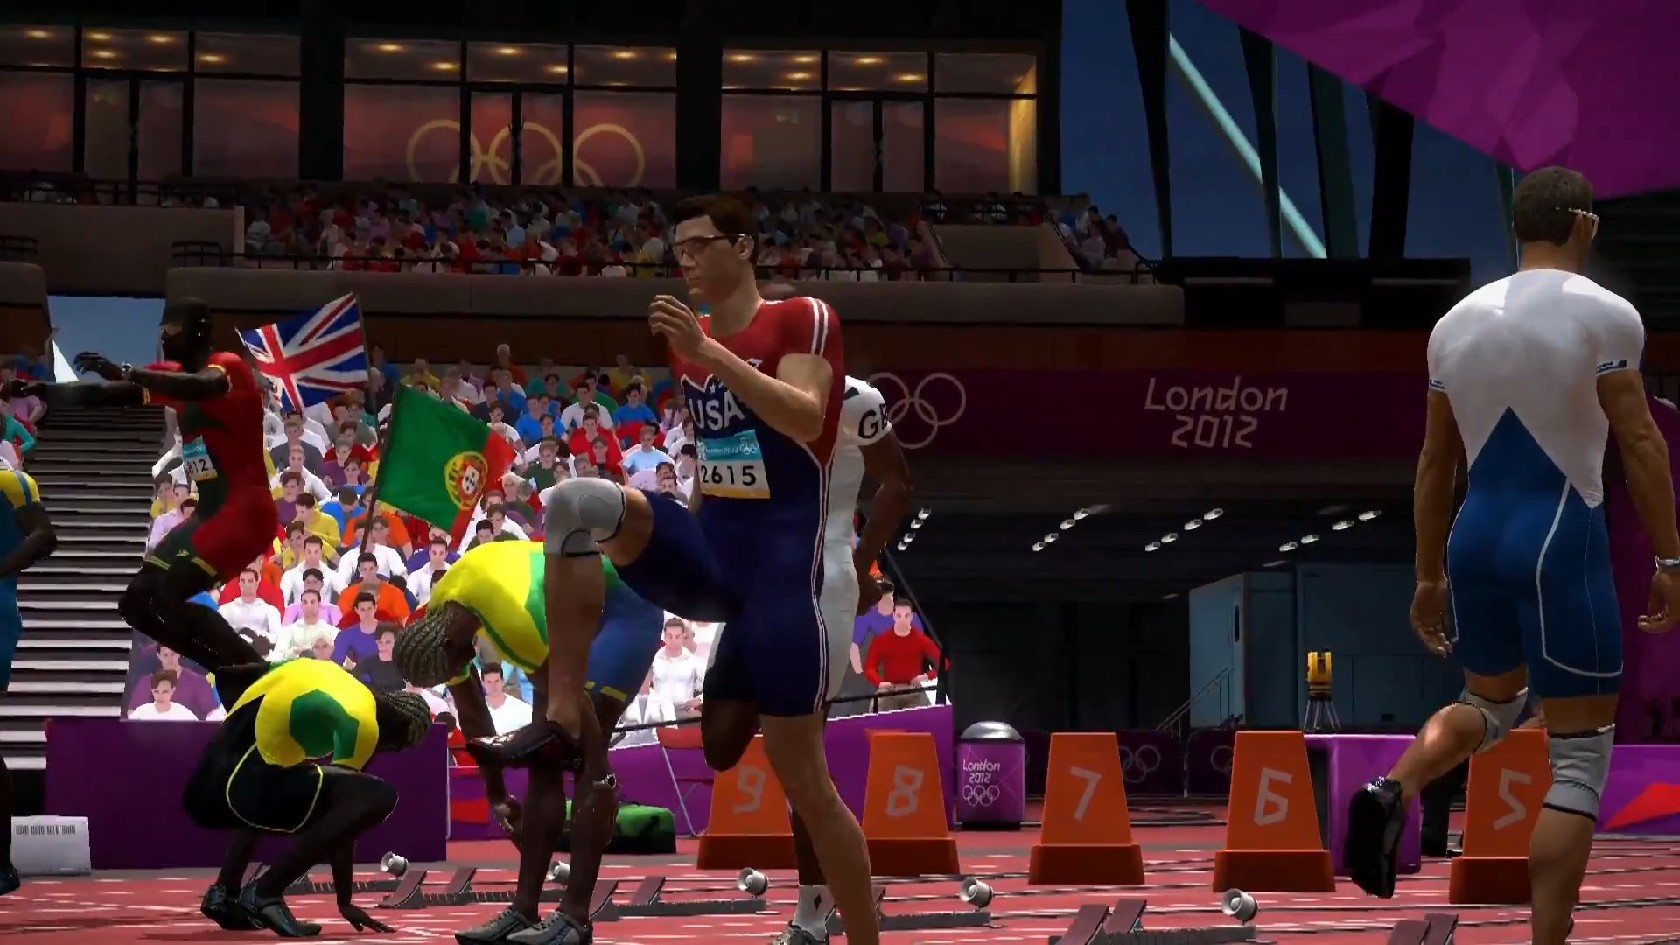 London-2012-The-Official-Video-Game-of-the-Olympic-Games-Trailer_5.jpg